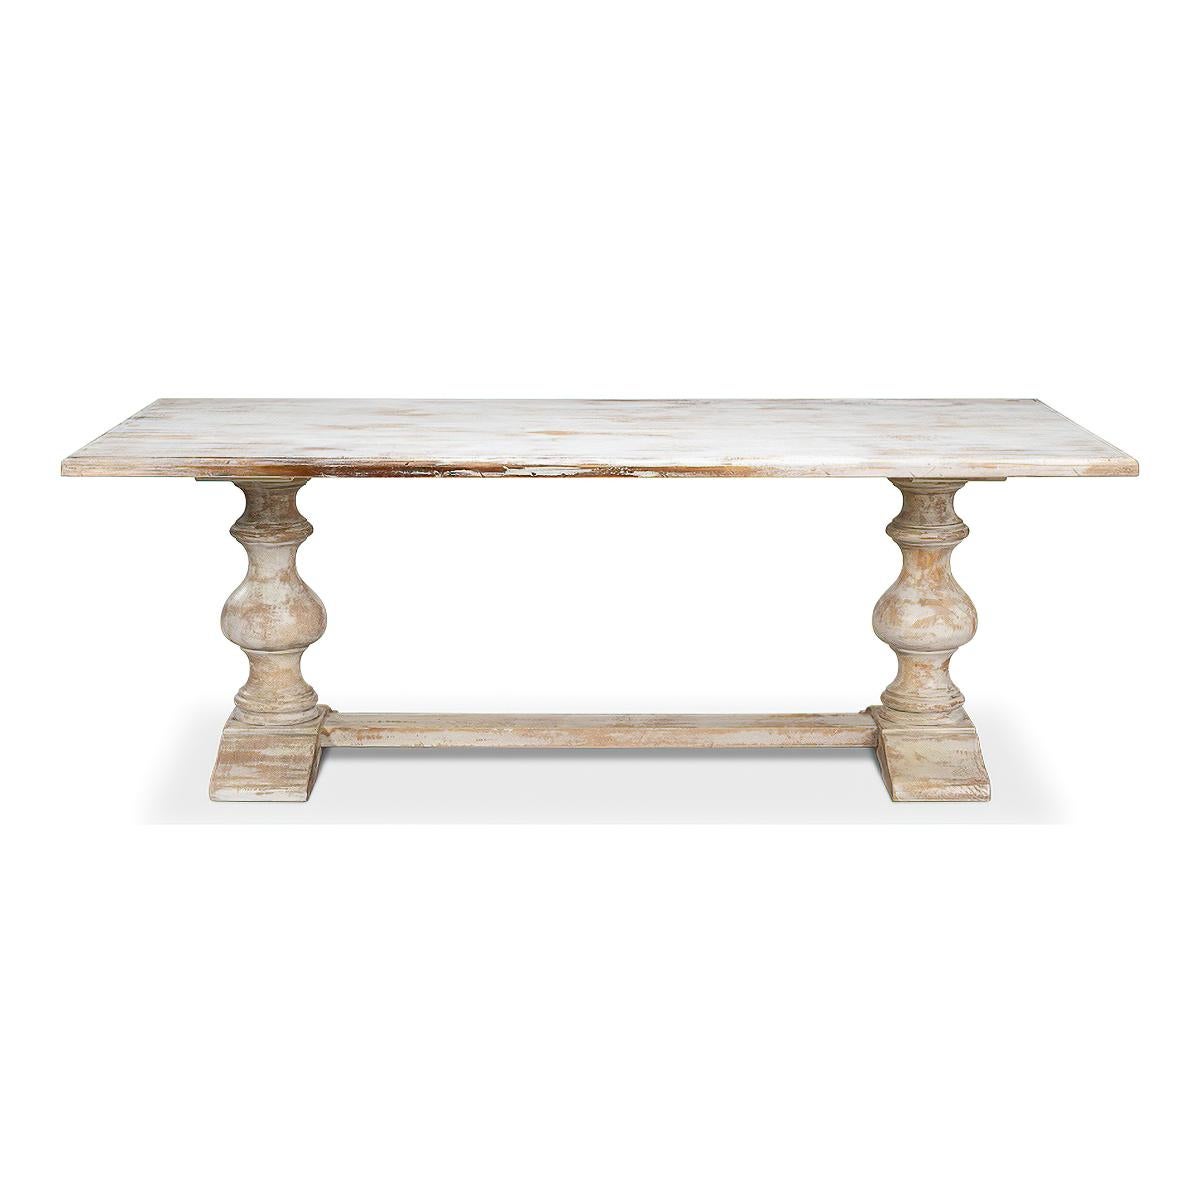 A French Provincial refectory table with a unique distressed white painted finish.  With a molded edge and raised on baluster turned legs in a trestle form with a stretcher. 

Dimensions: 84